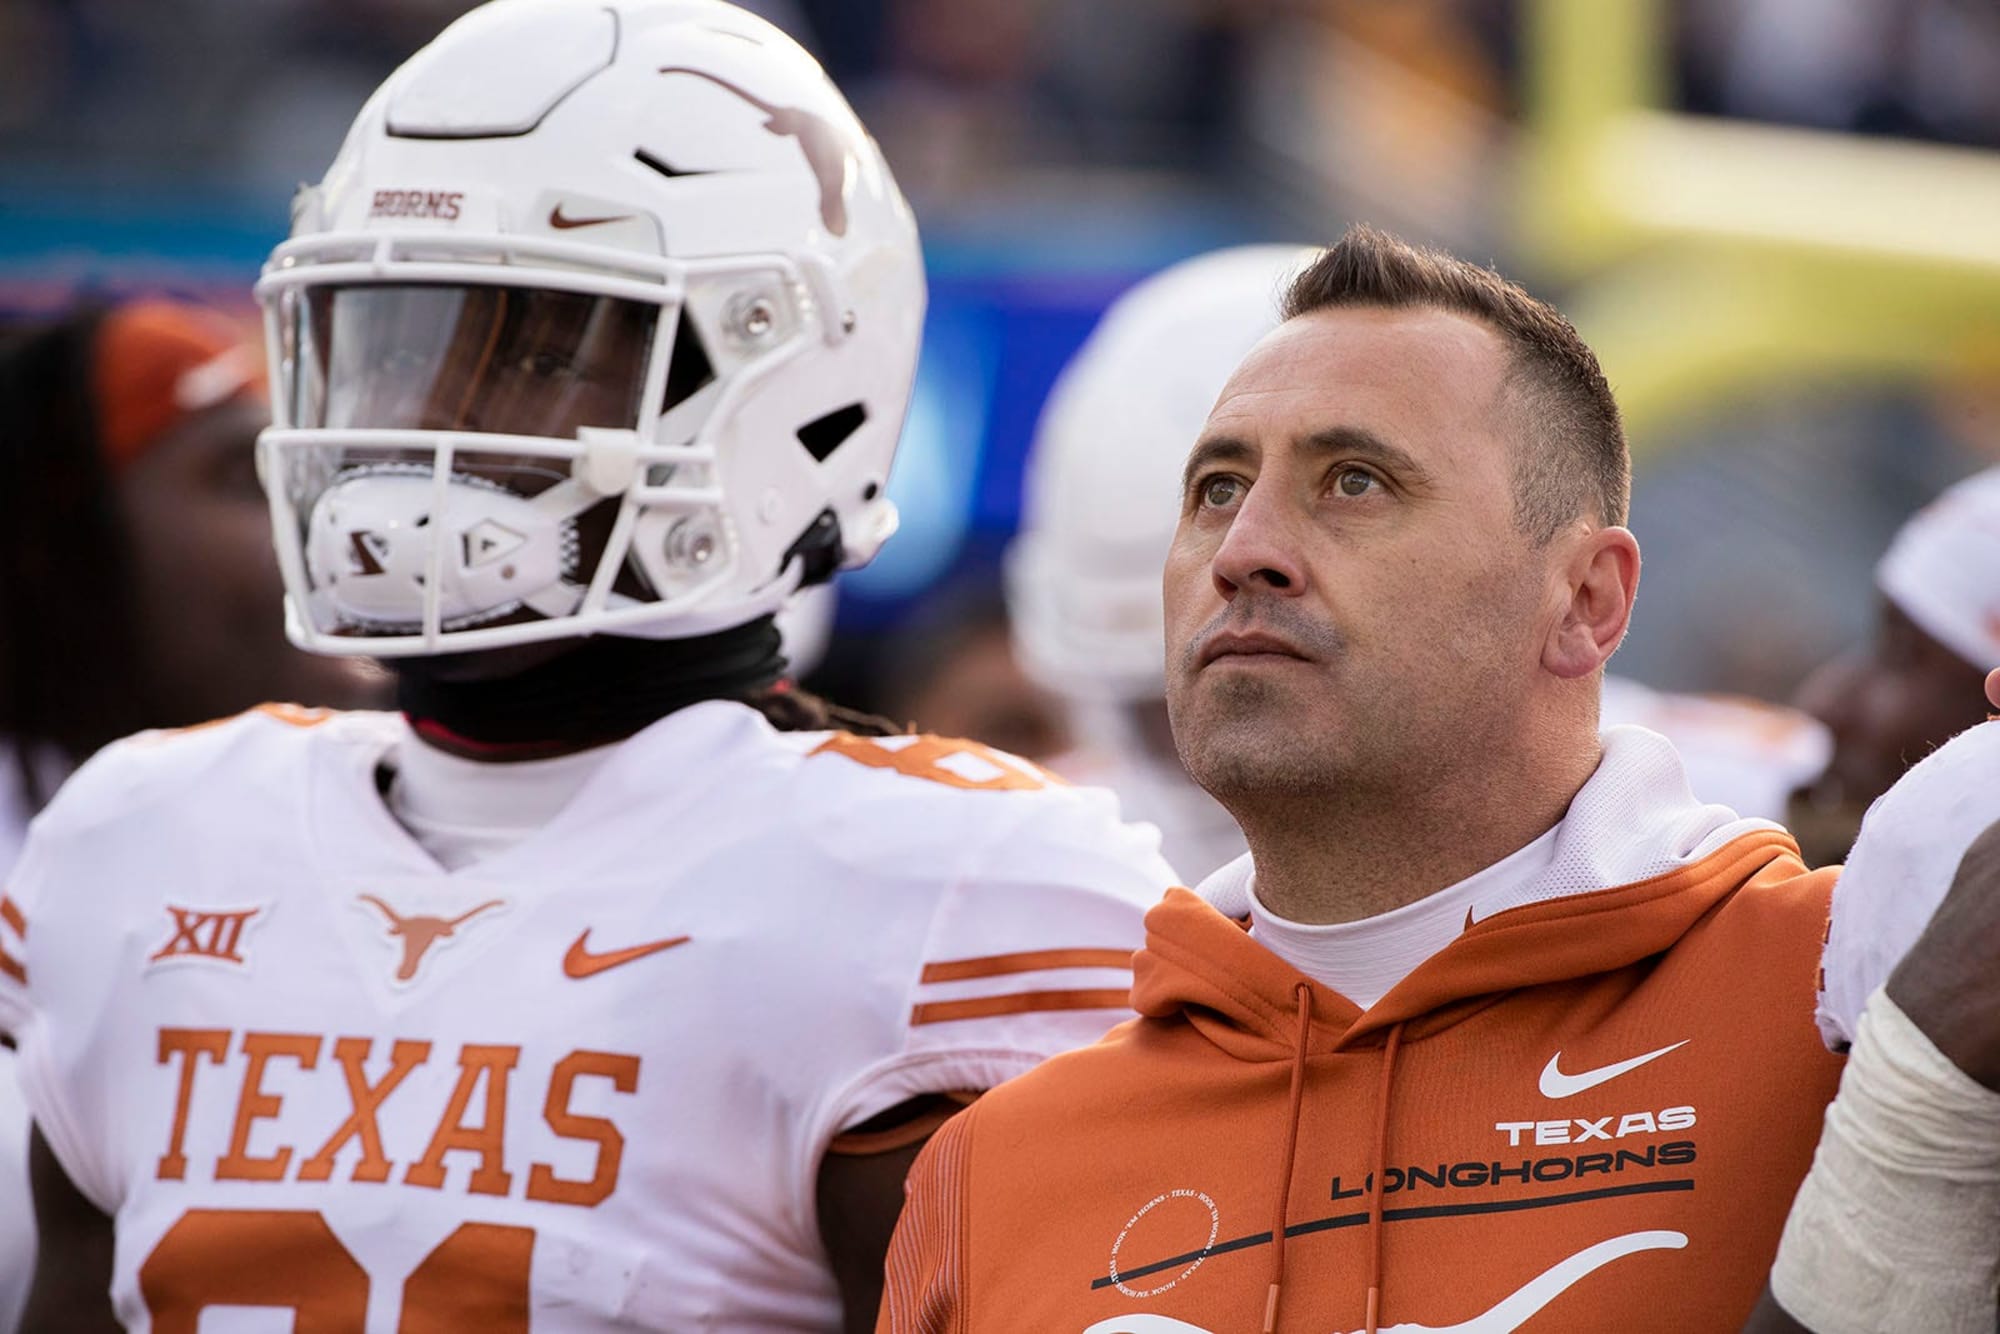 Longhorn 2022 Football Schedule 2022 Texas Football Schedule And Way-Too-Early Predictions